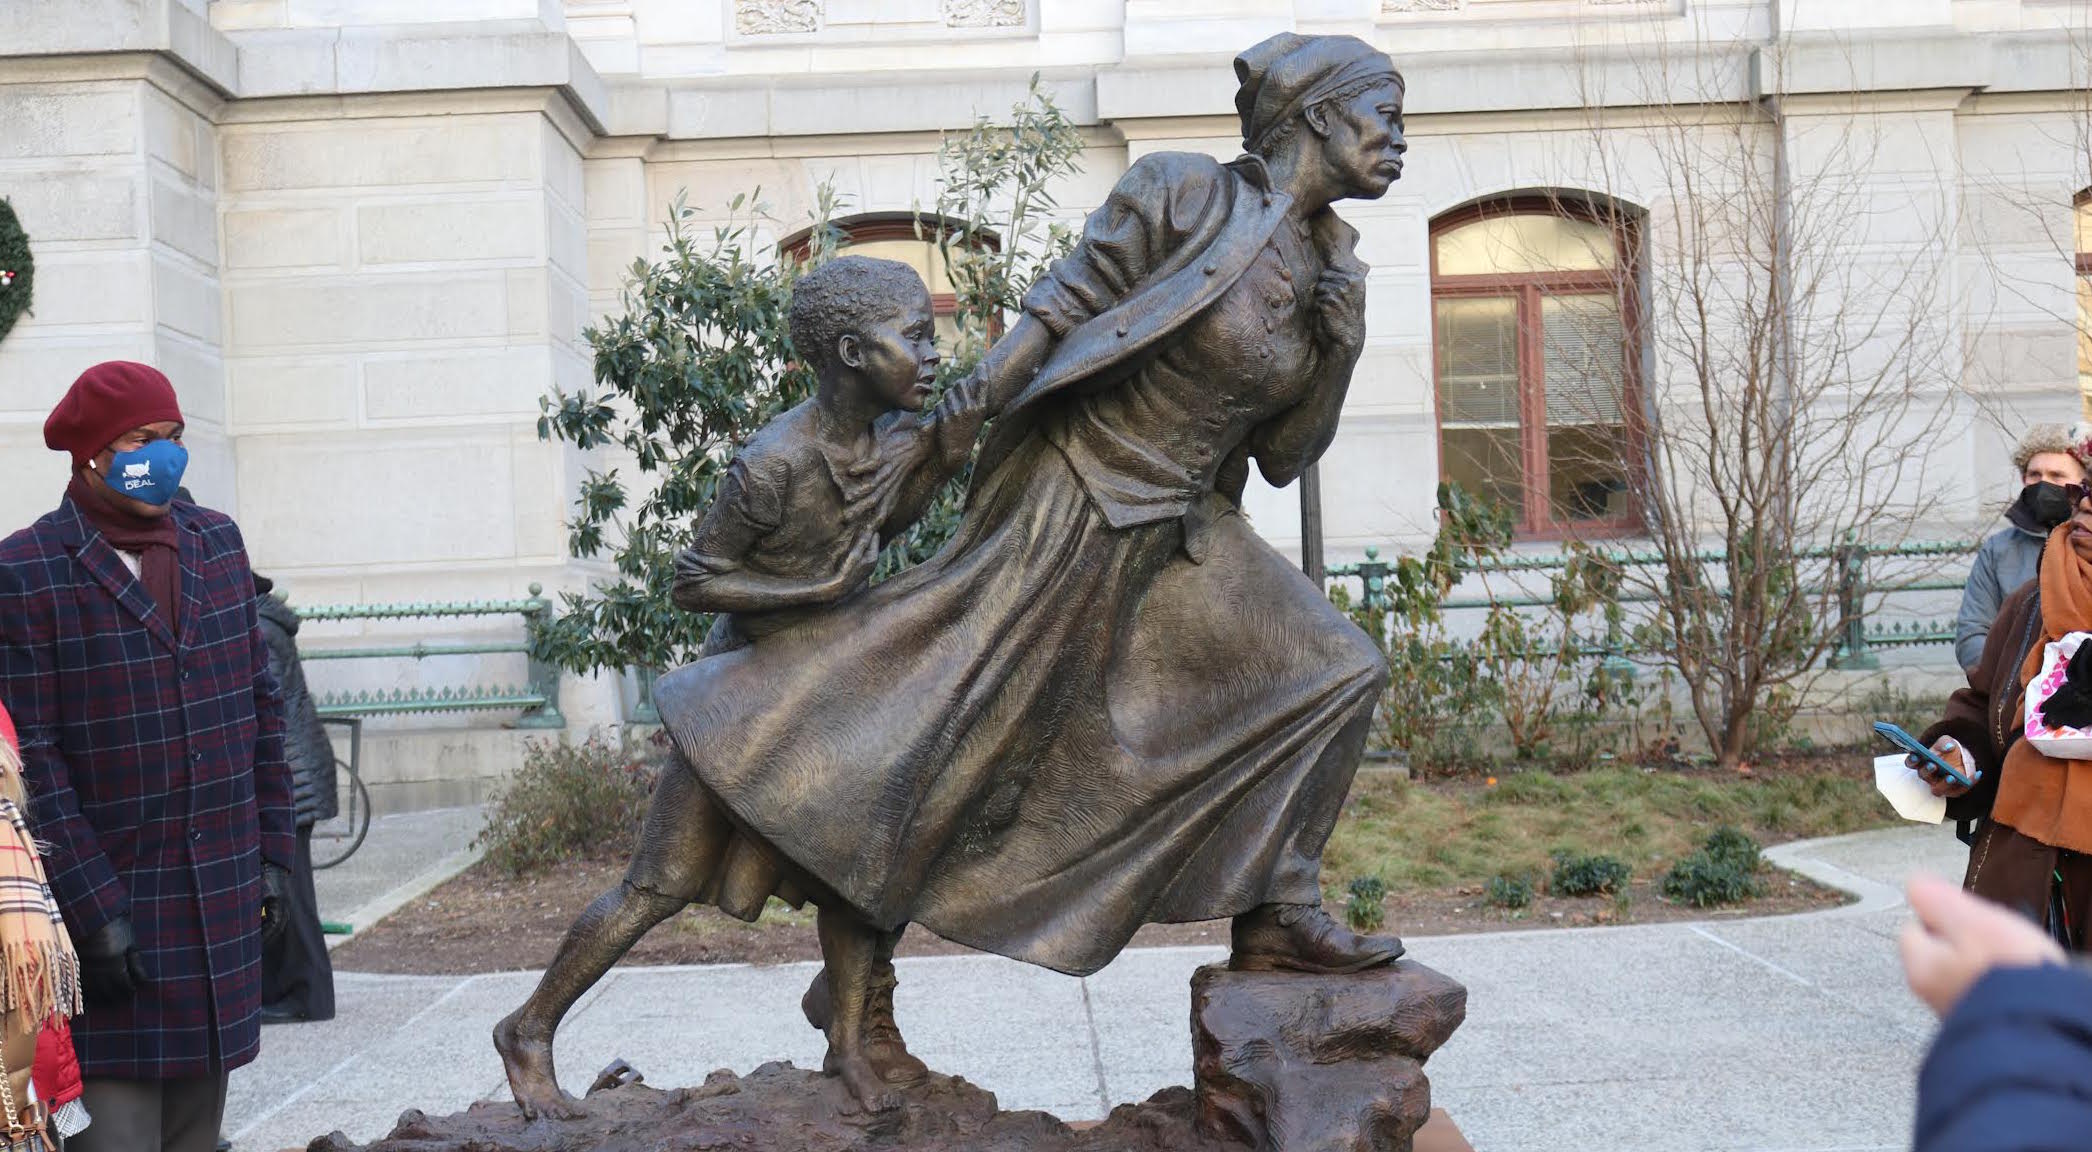 The Harriet Tubman statue will stay at City Hall until March 31, 2022. Photo: Brittany Valentine/AL DÍA News
